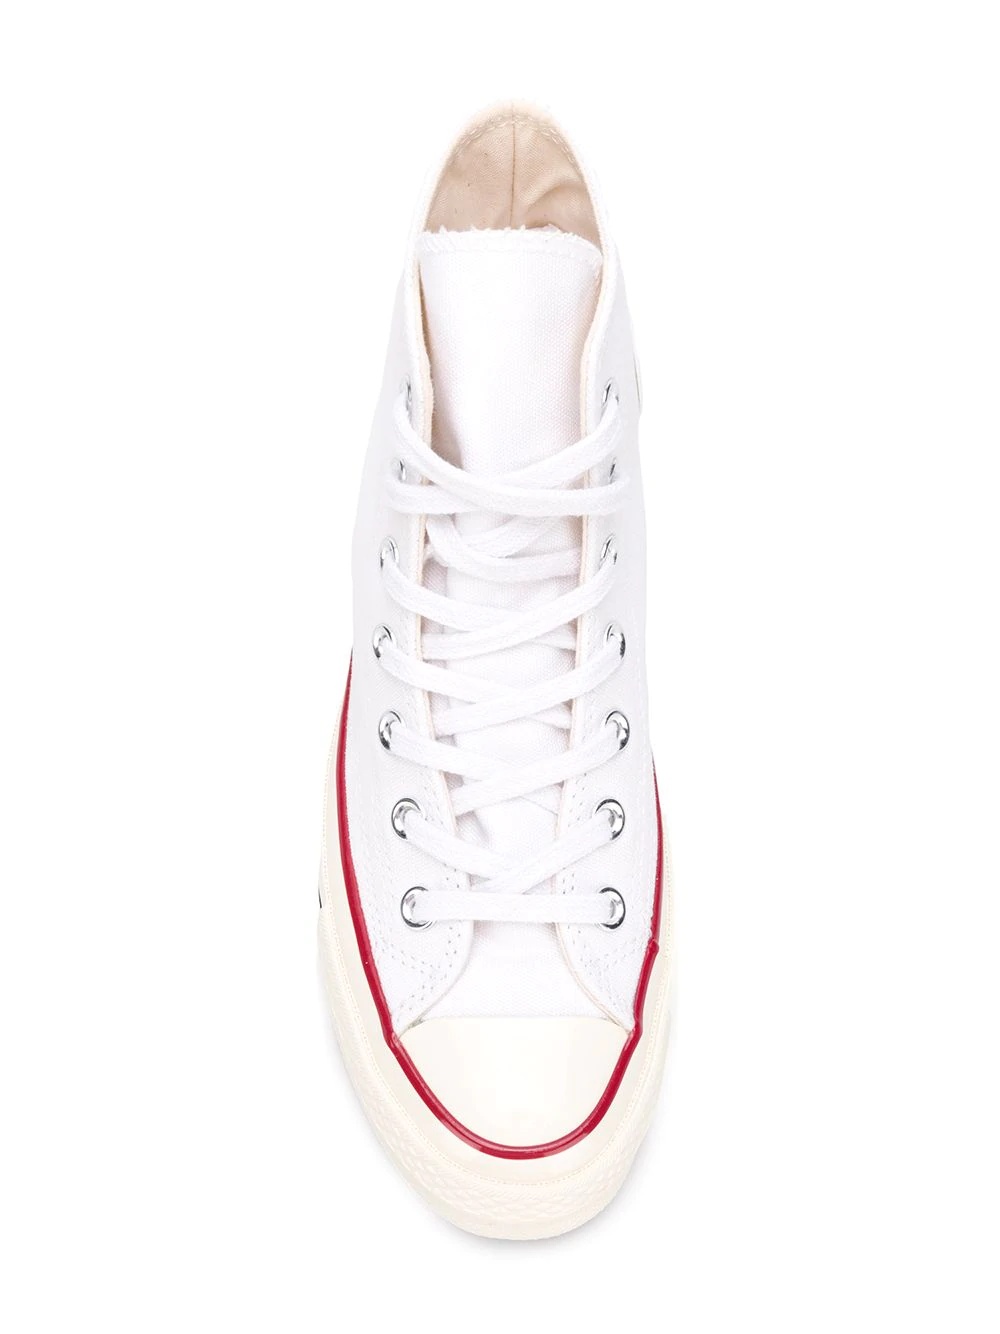 Chuck Taylor All Star 70 High "White" sneakers - 4